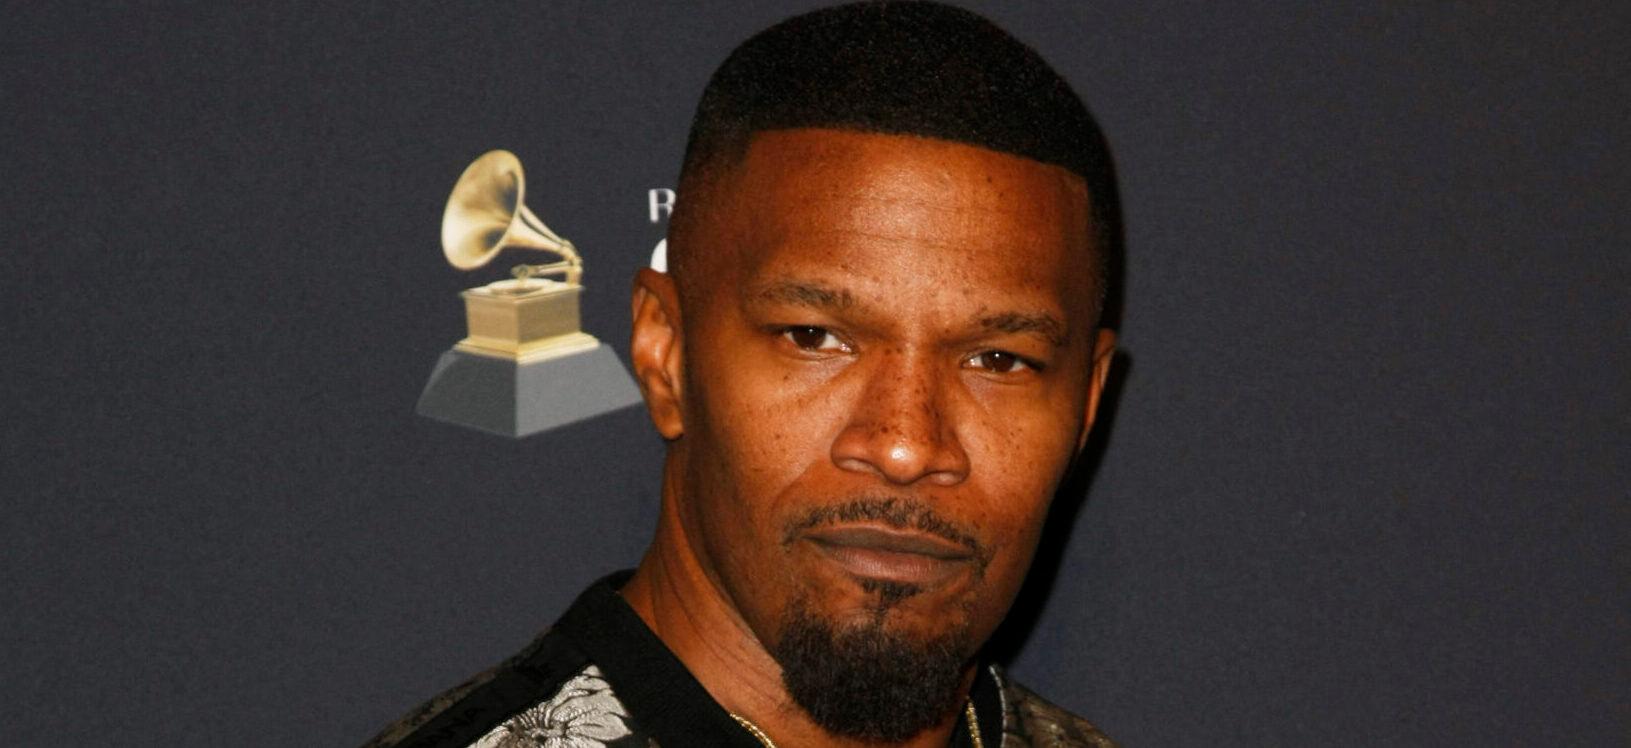 Jamie Foxx Looks Healthy In First Sighting Since Antisemitism Controversy Over A ‘Jesus’ Post